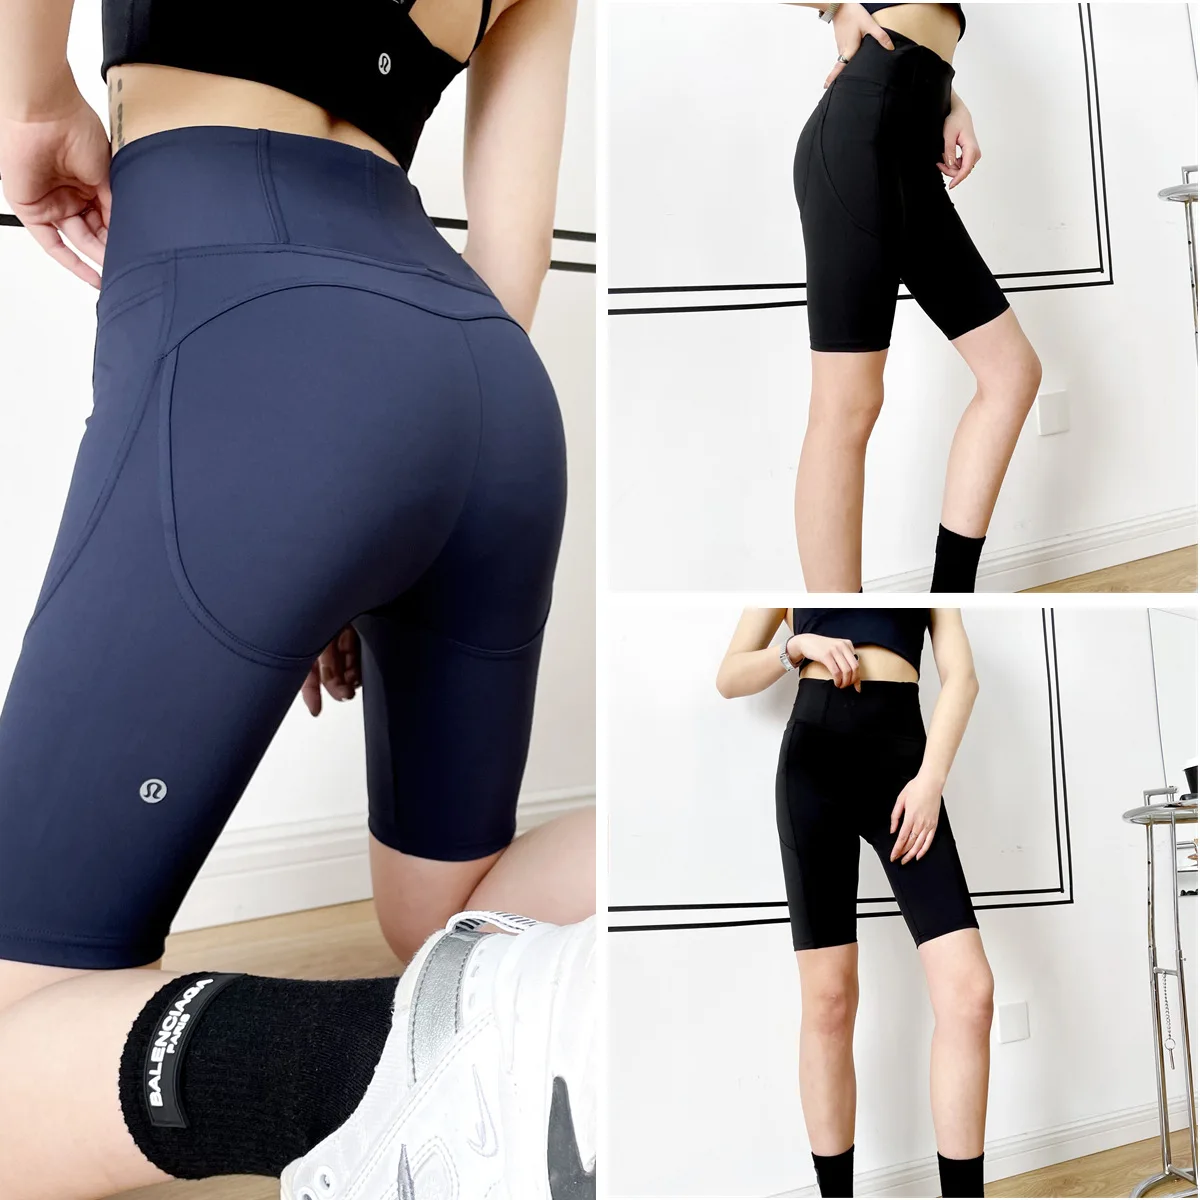 

Lulu Women's Yoga Shorts Fitness Exercise Nude Feel High Waist Hip Lift Breathable Quick-Drying Five-Point Shorts Align Clothing